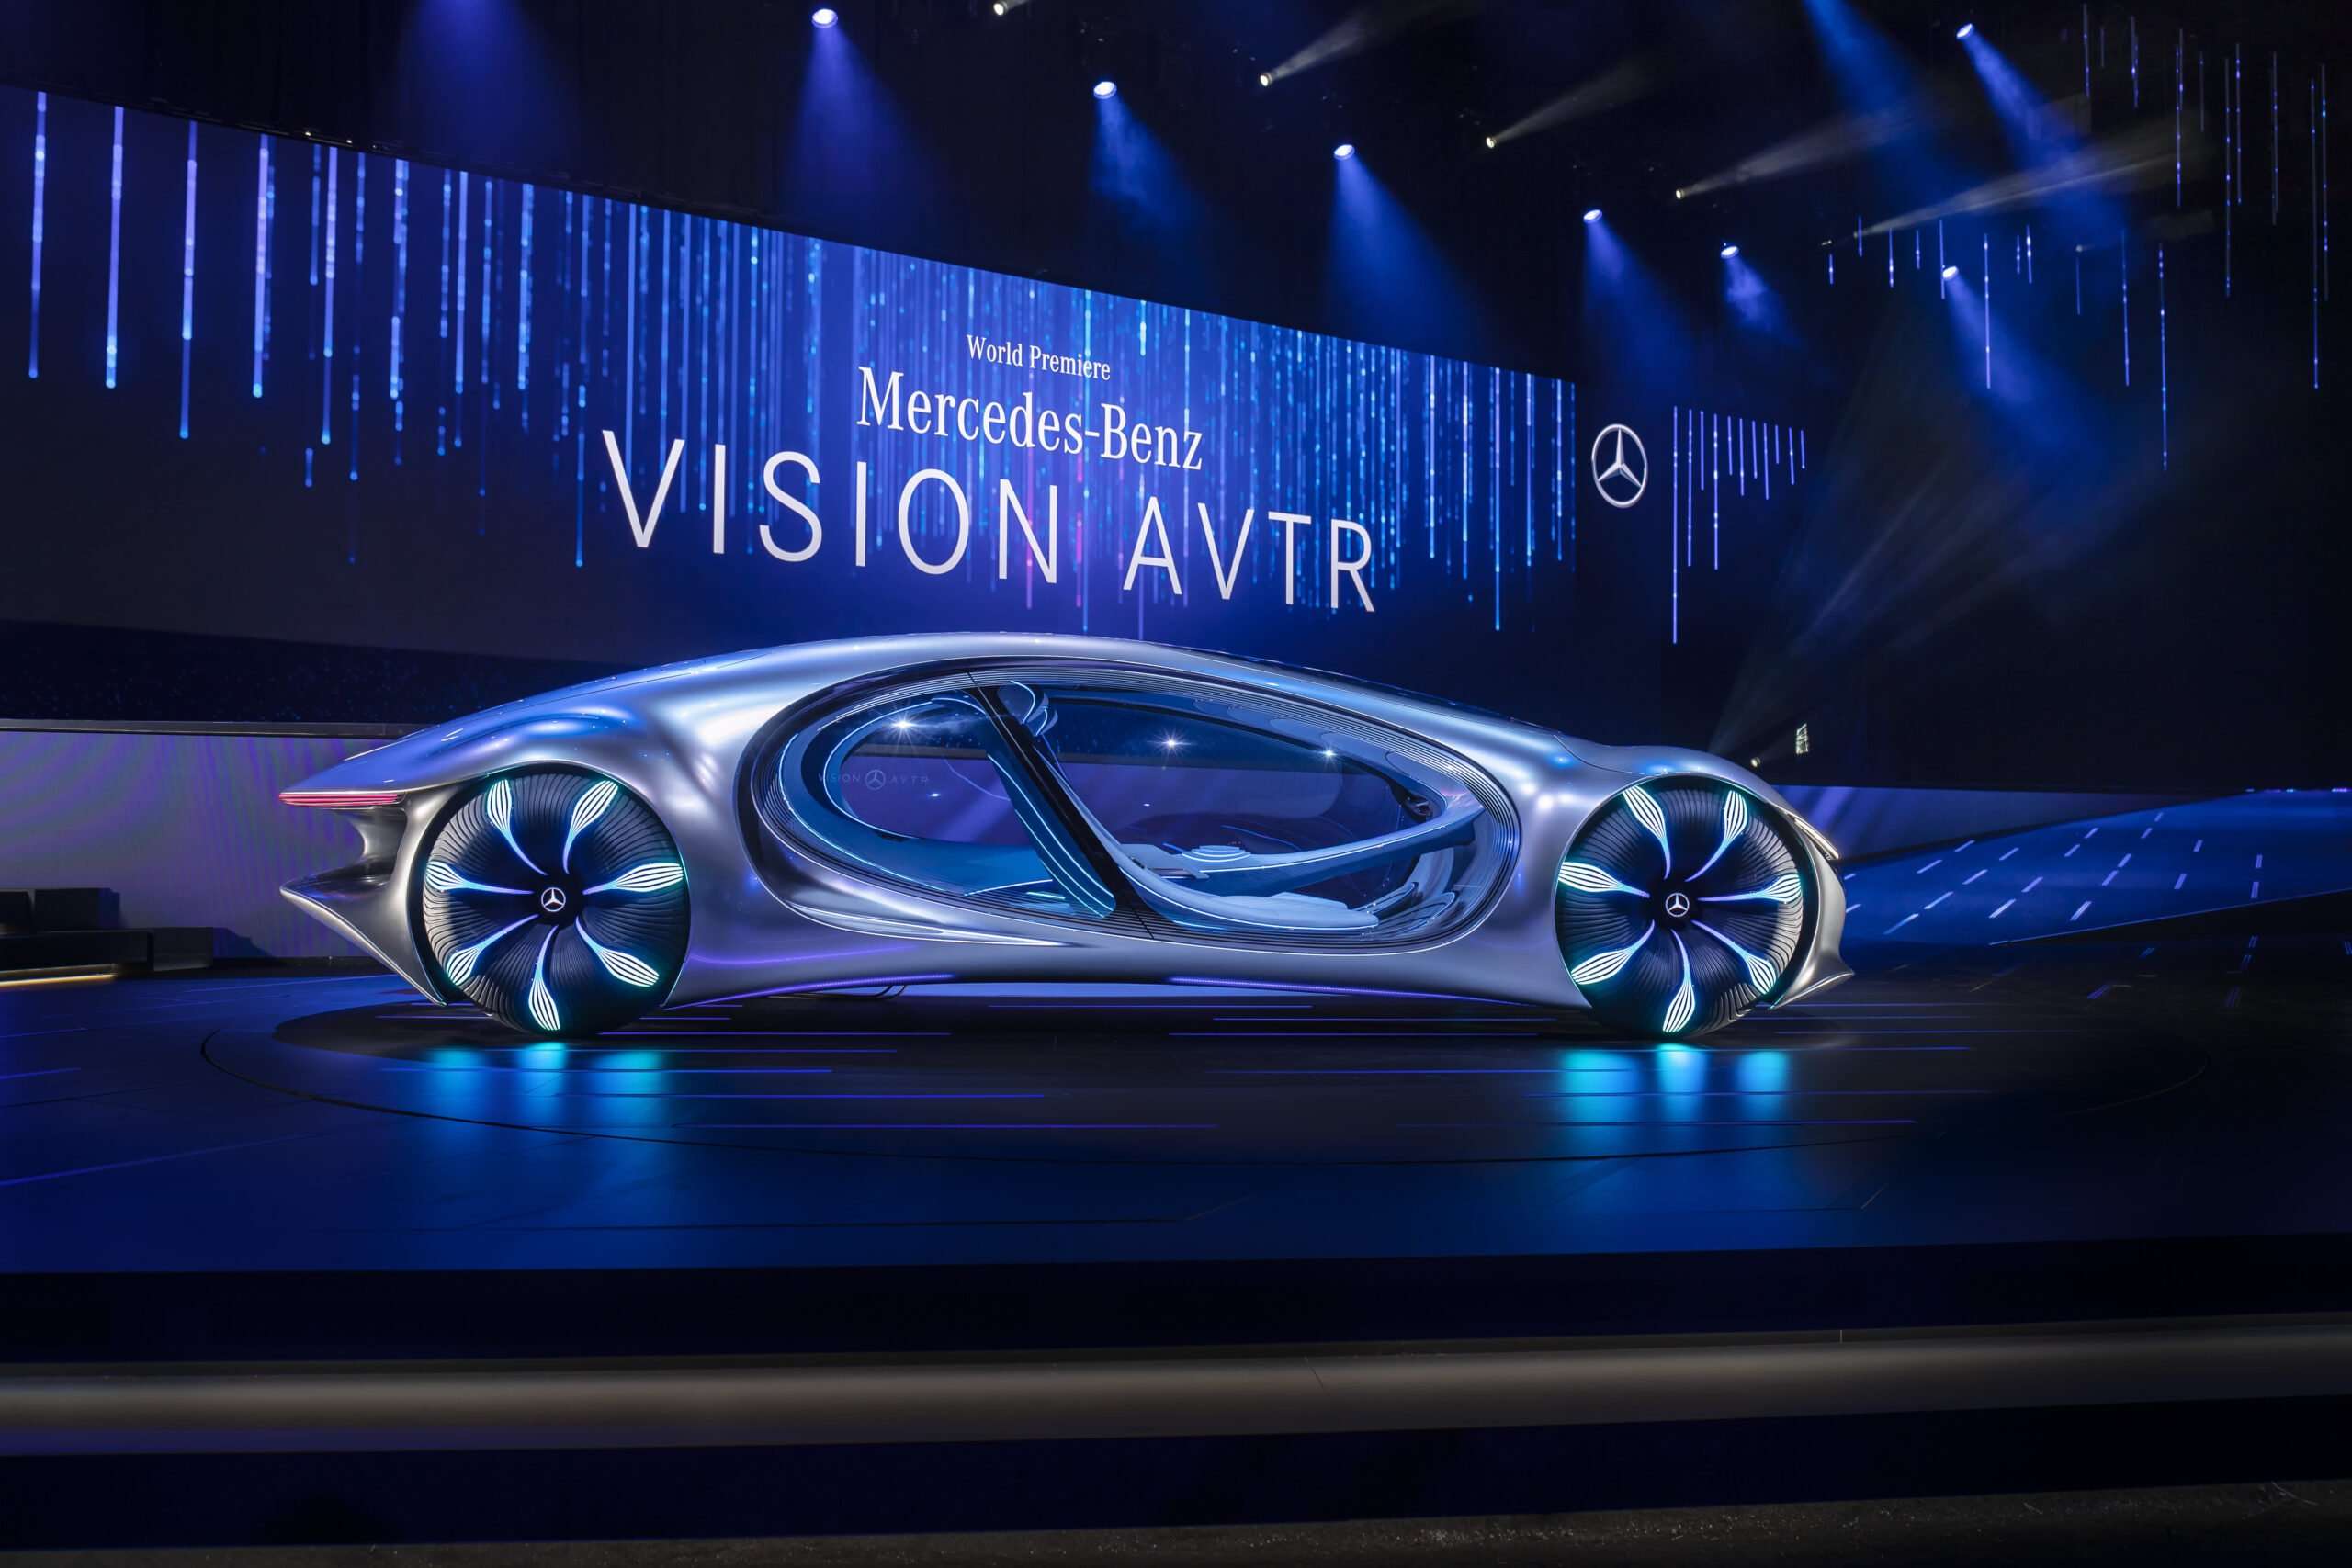 What is the Price of Mercedes Benz Vision Avtr